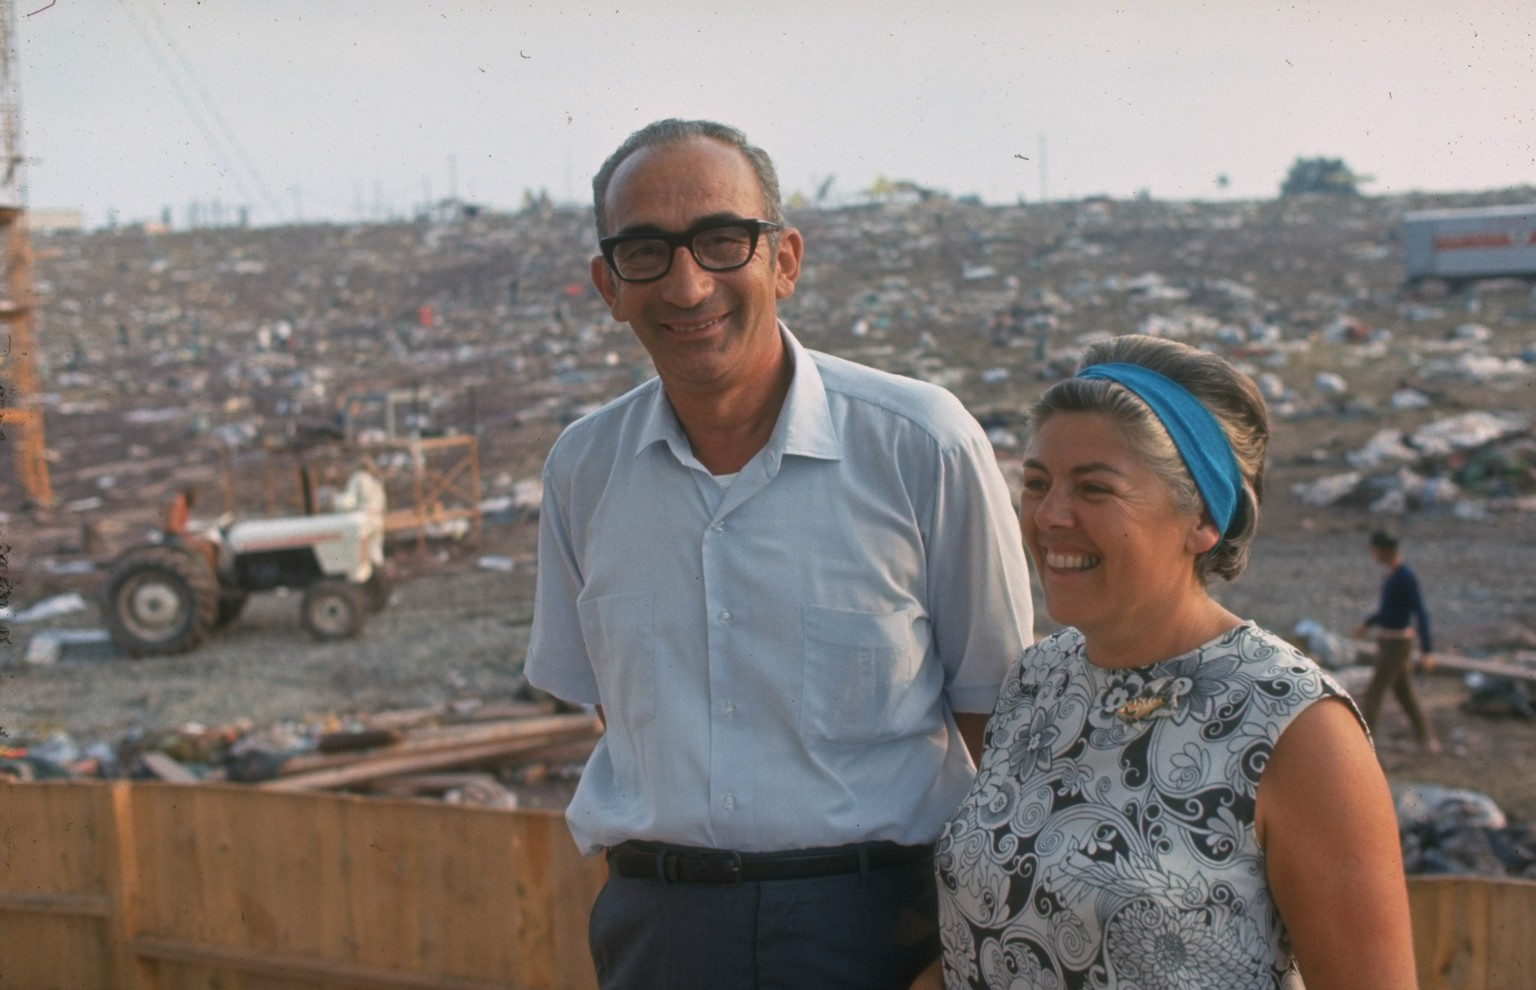 Max and Miriam Yasgur on their land after the Woodstock Music &amp; Art Fair. (Photo By Bill Eppridge/The LIFE Picture Collection via Getty Images)